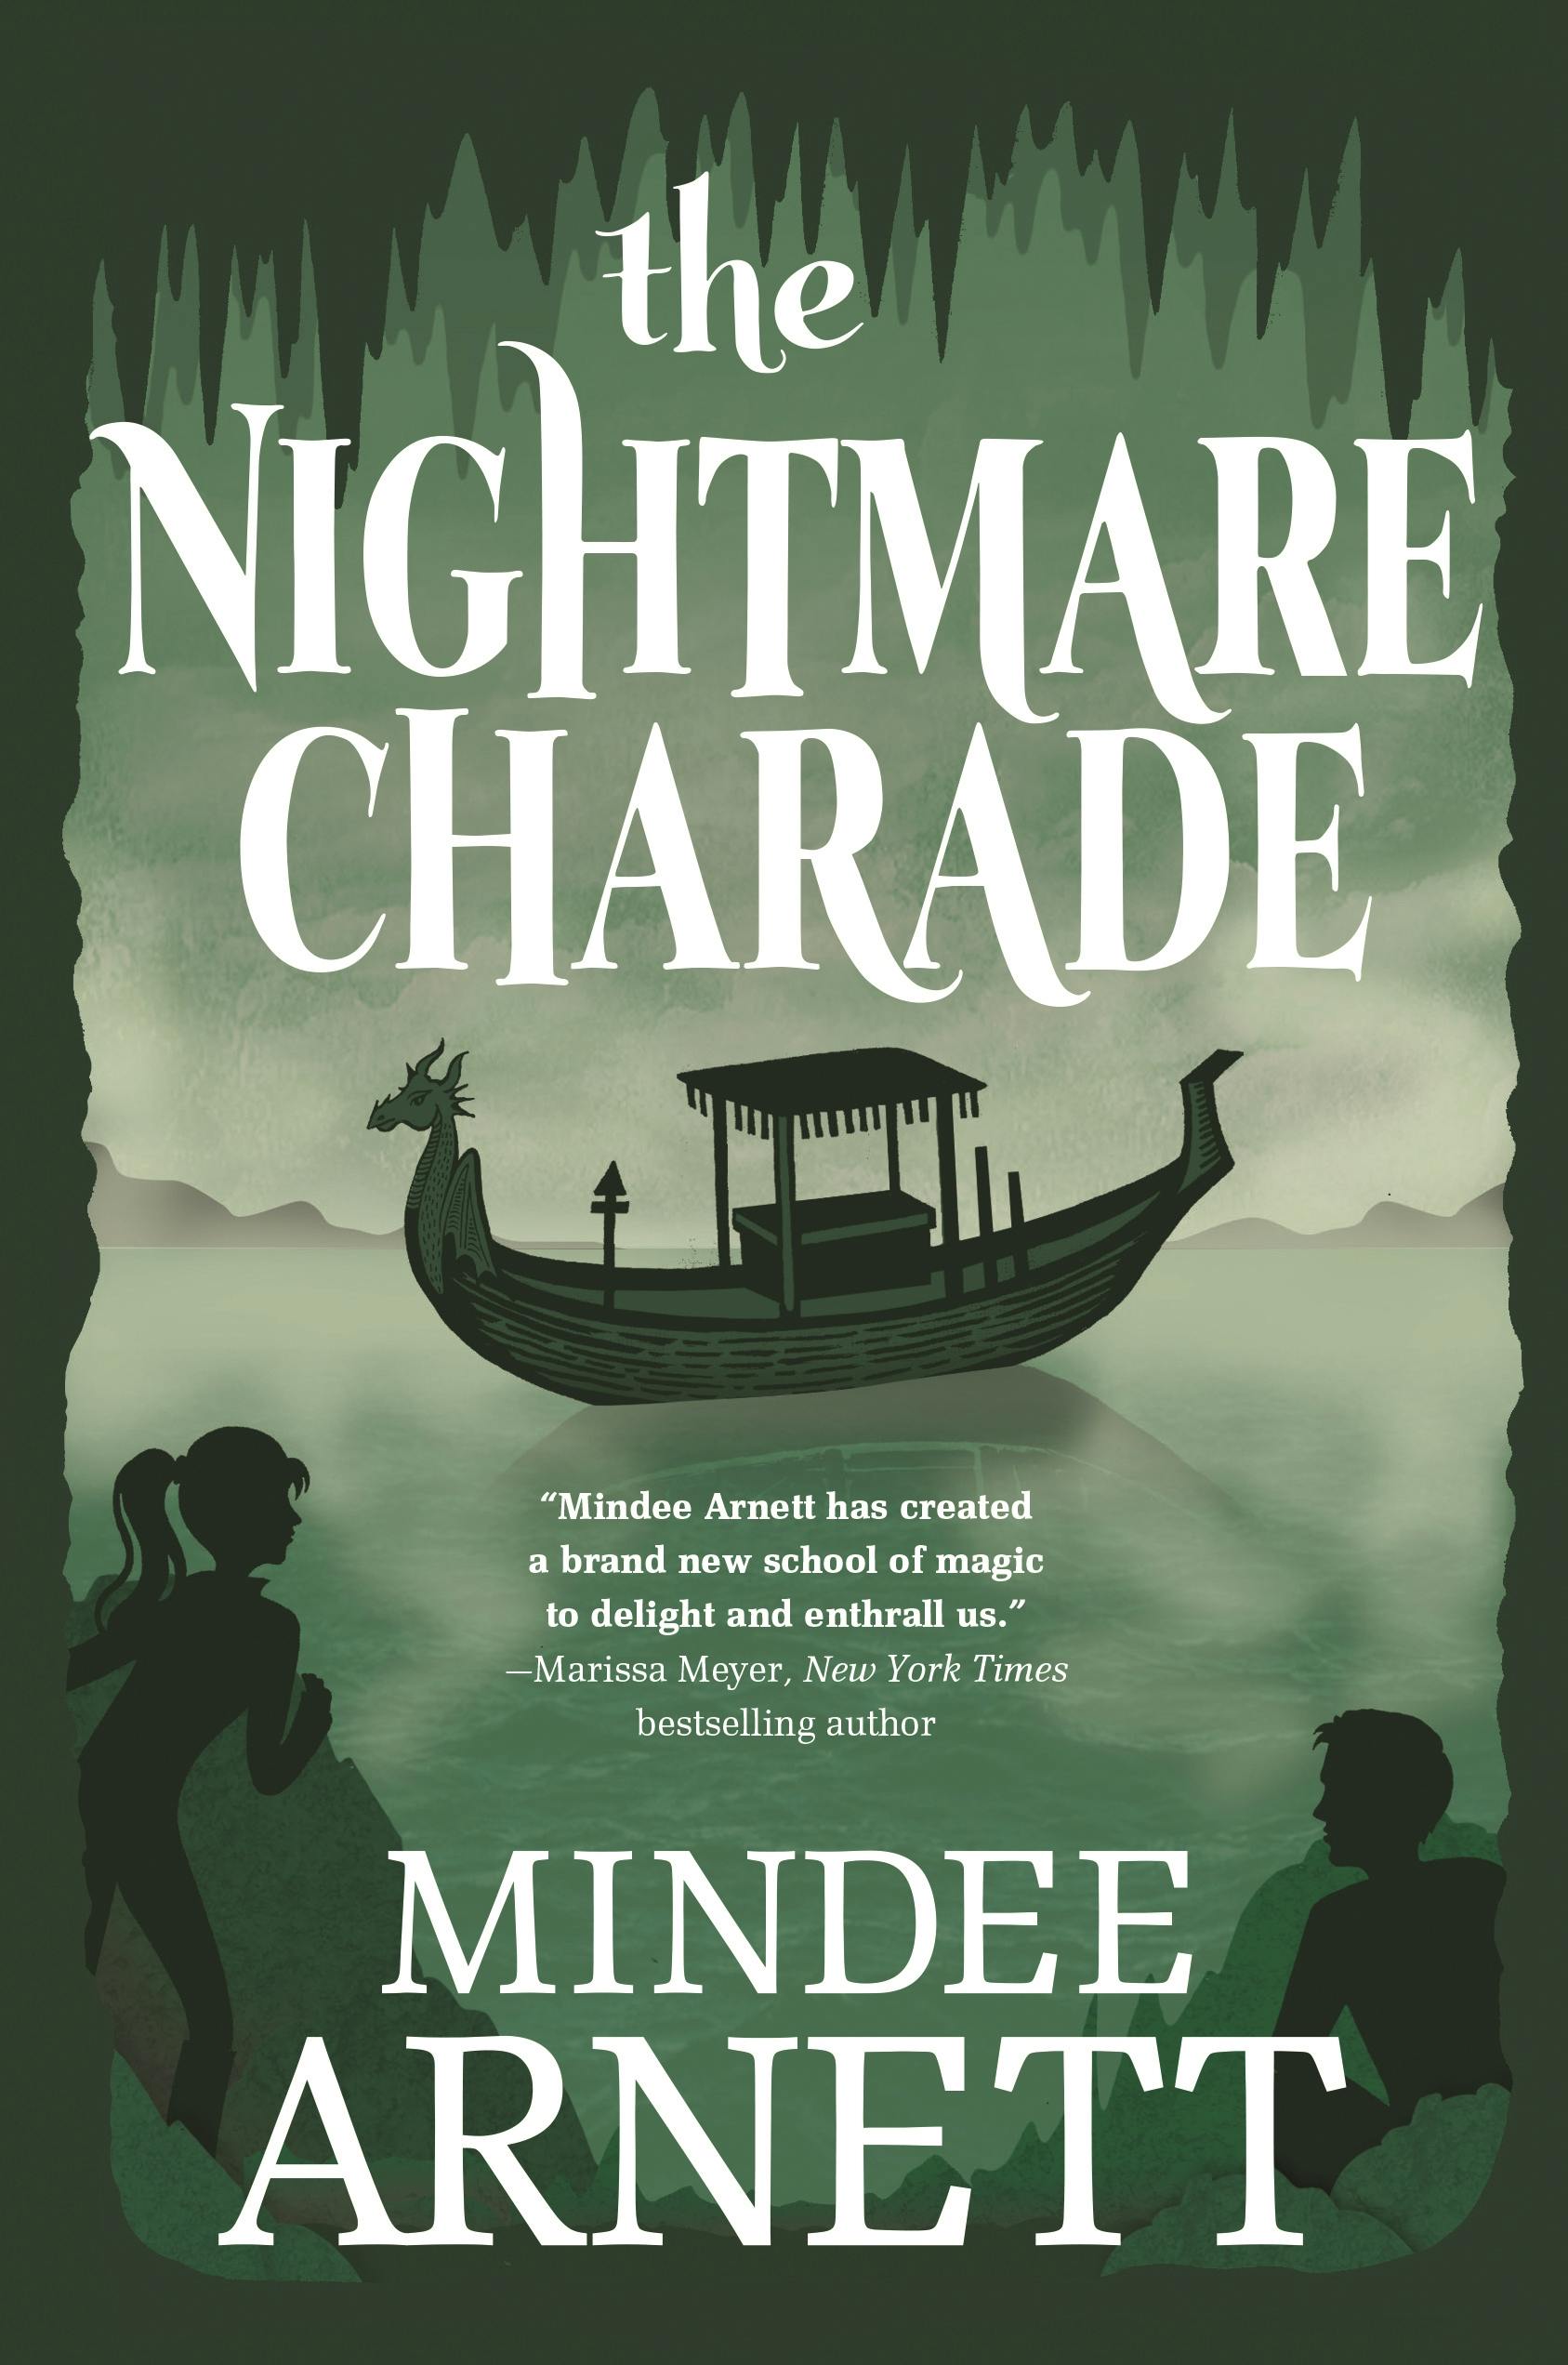 Image of The Nightmare Charade